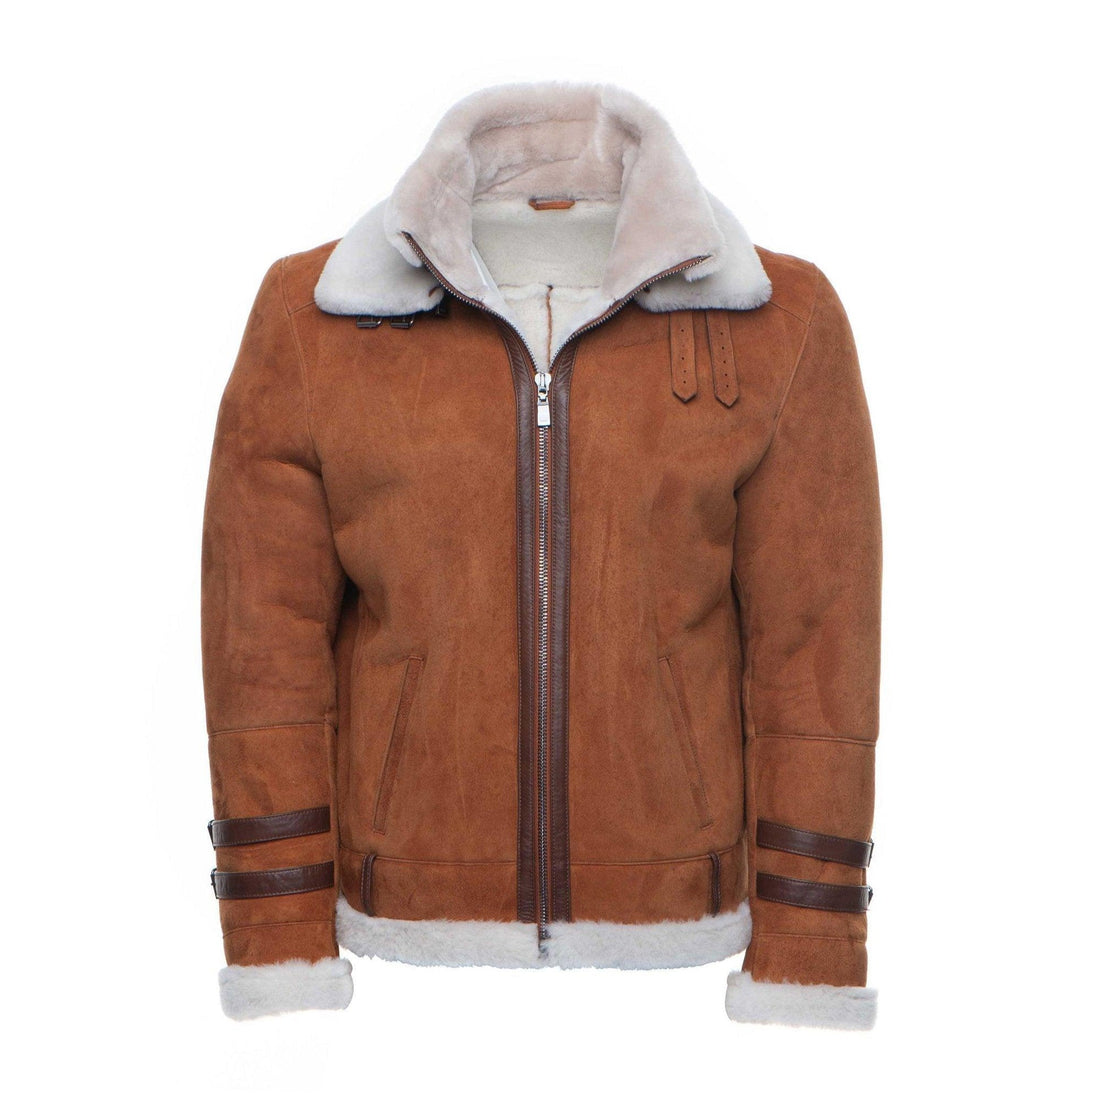 The Evolution of the B3 Bomber Shearling Jacket